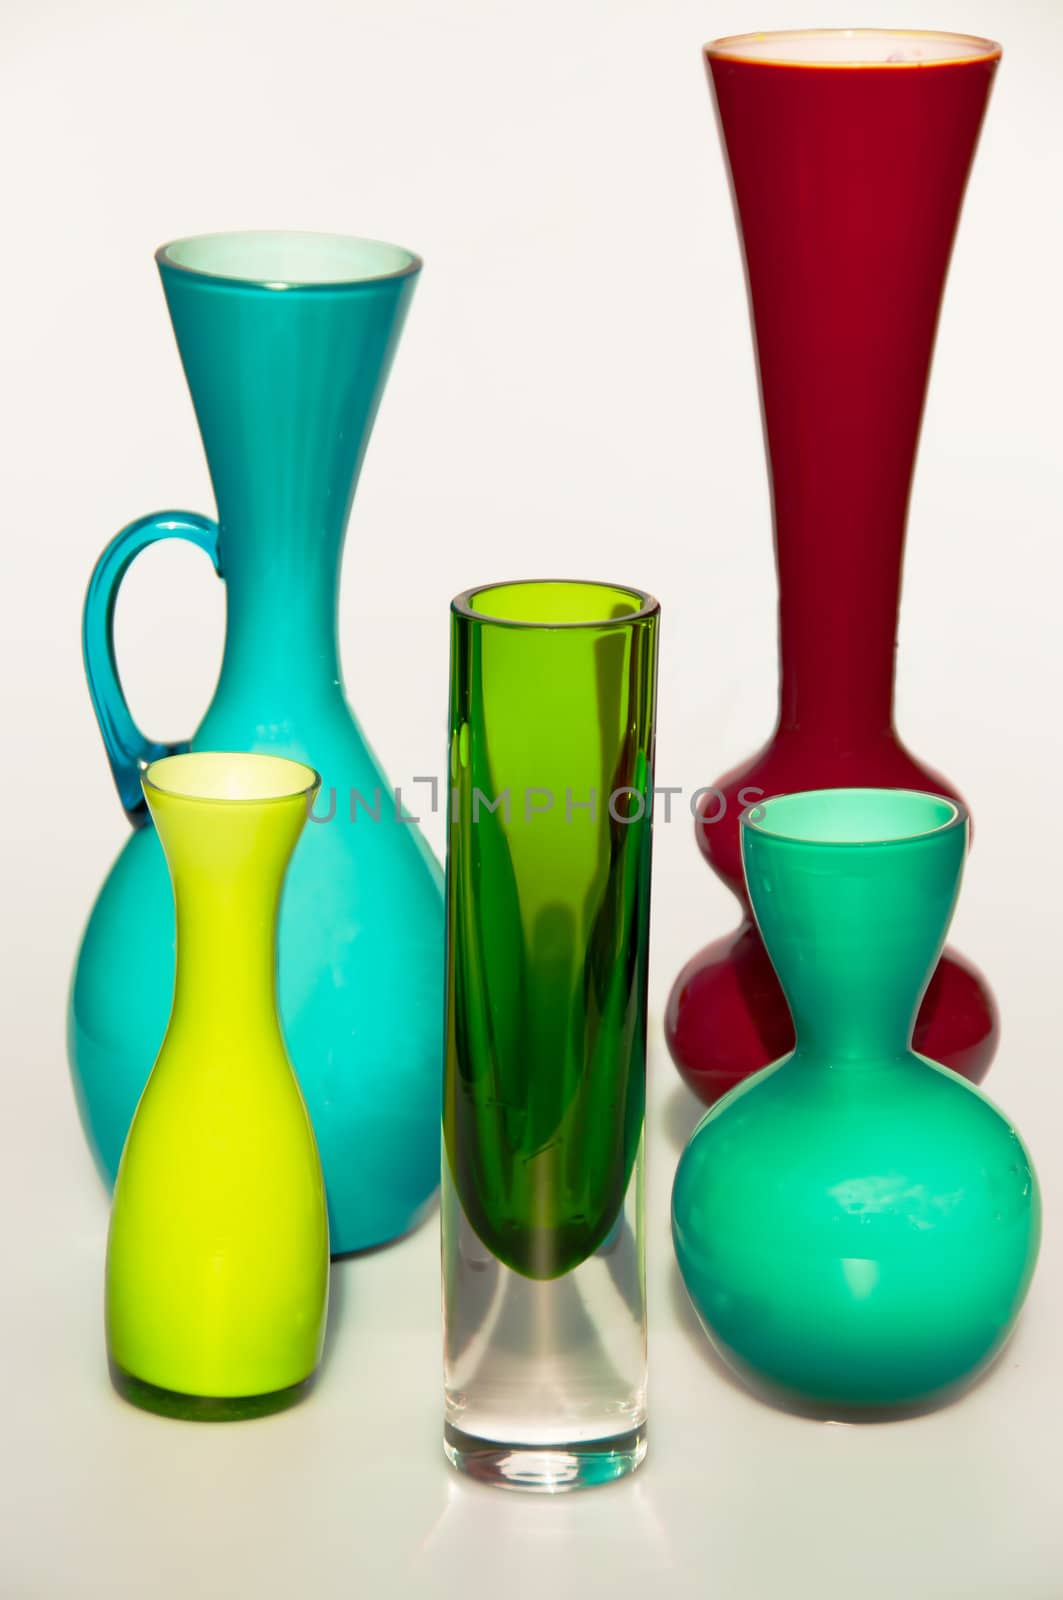 Colourful retro vases by GryT